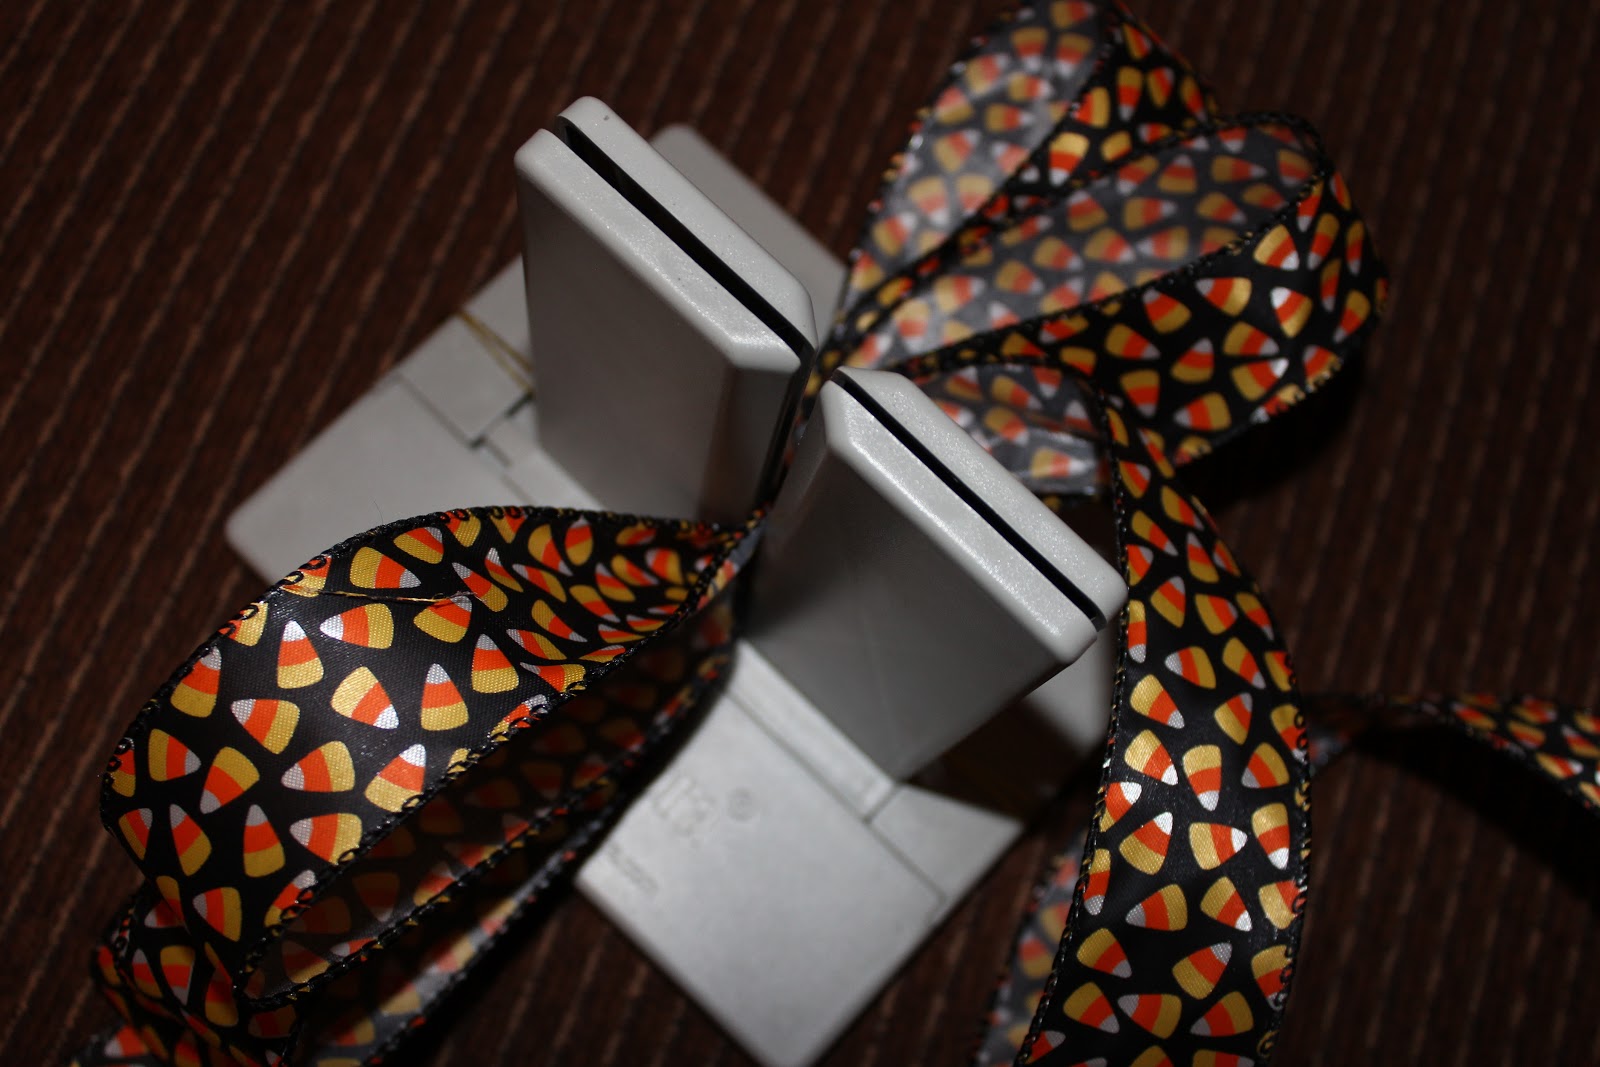 Darice Bowdabra bow maker and craft tool review - The Gadgeteer